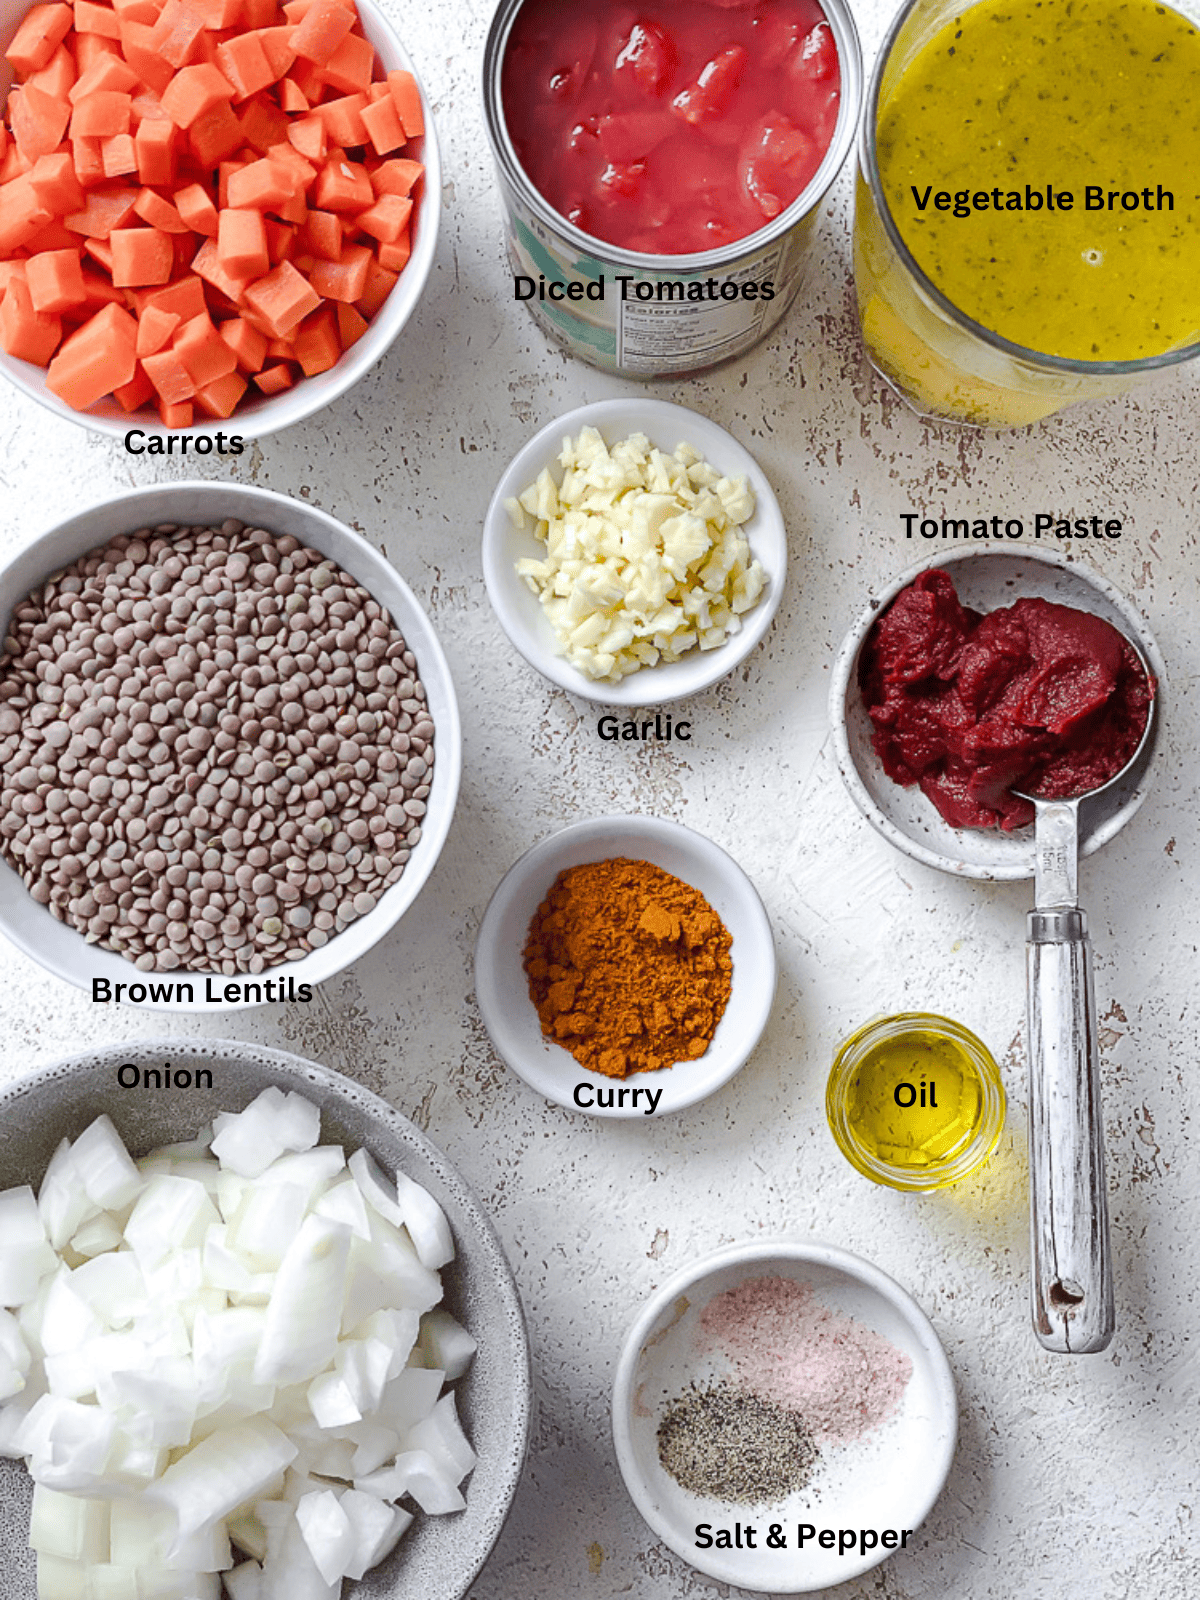 ingredients for Quick Curried Lentils [Stove, Crockpot, IP] measured out on a white surface